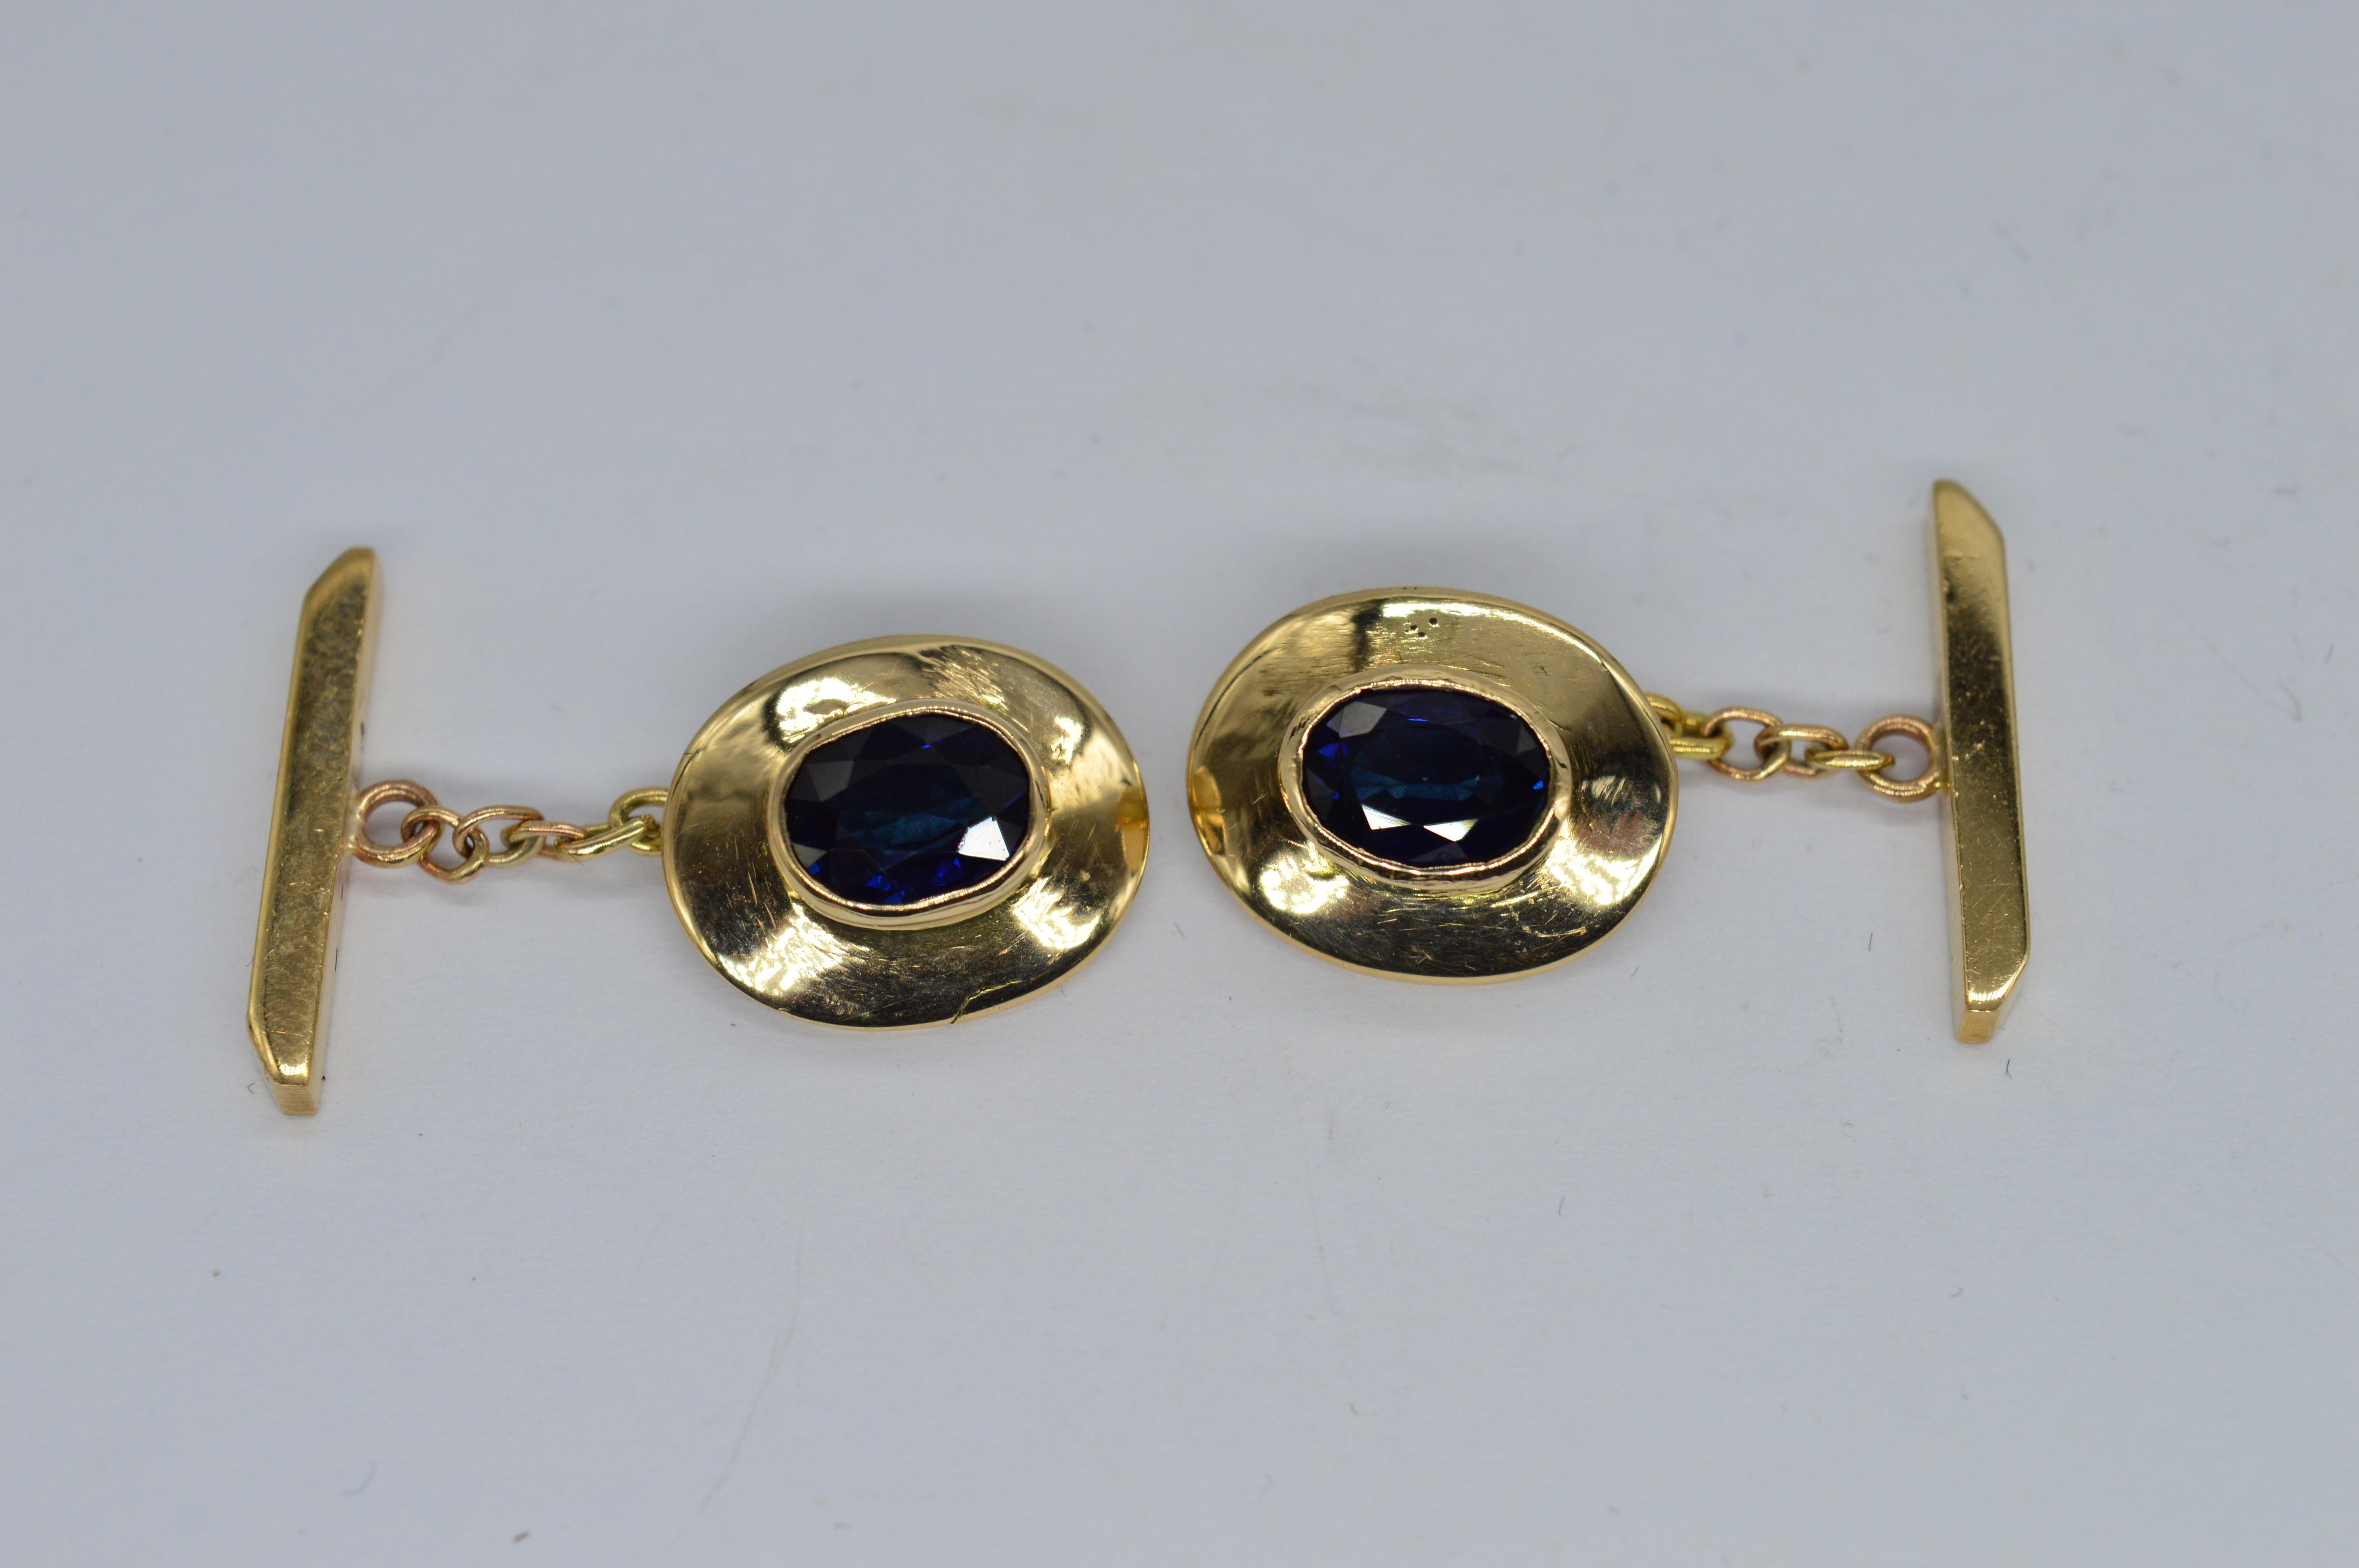 A set of handcrafted 18ct yellow gold cufflinks set with a total of 3cts of Rich Blue Sapphires. 

A luxury set that focuses on the supreme quality of the stones

9.17g

We have sold to the set of Hit shows like Peaky Blinders and Outlander as well